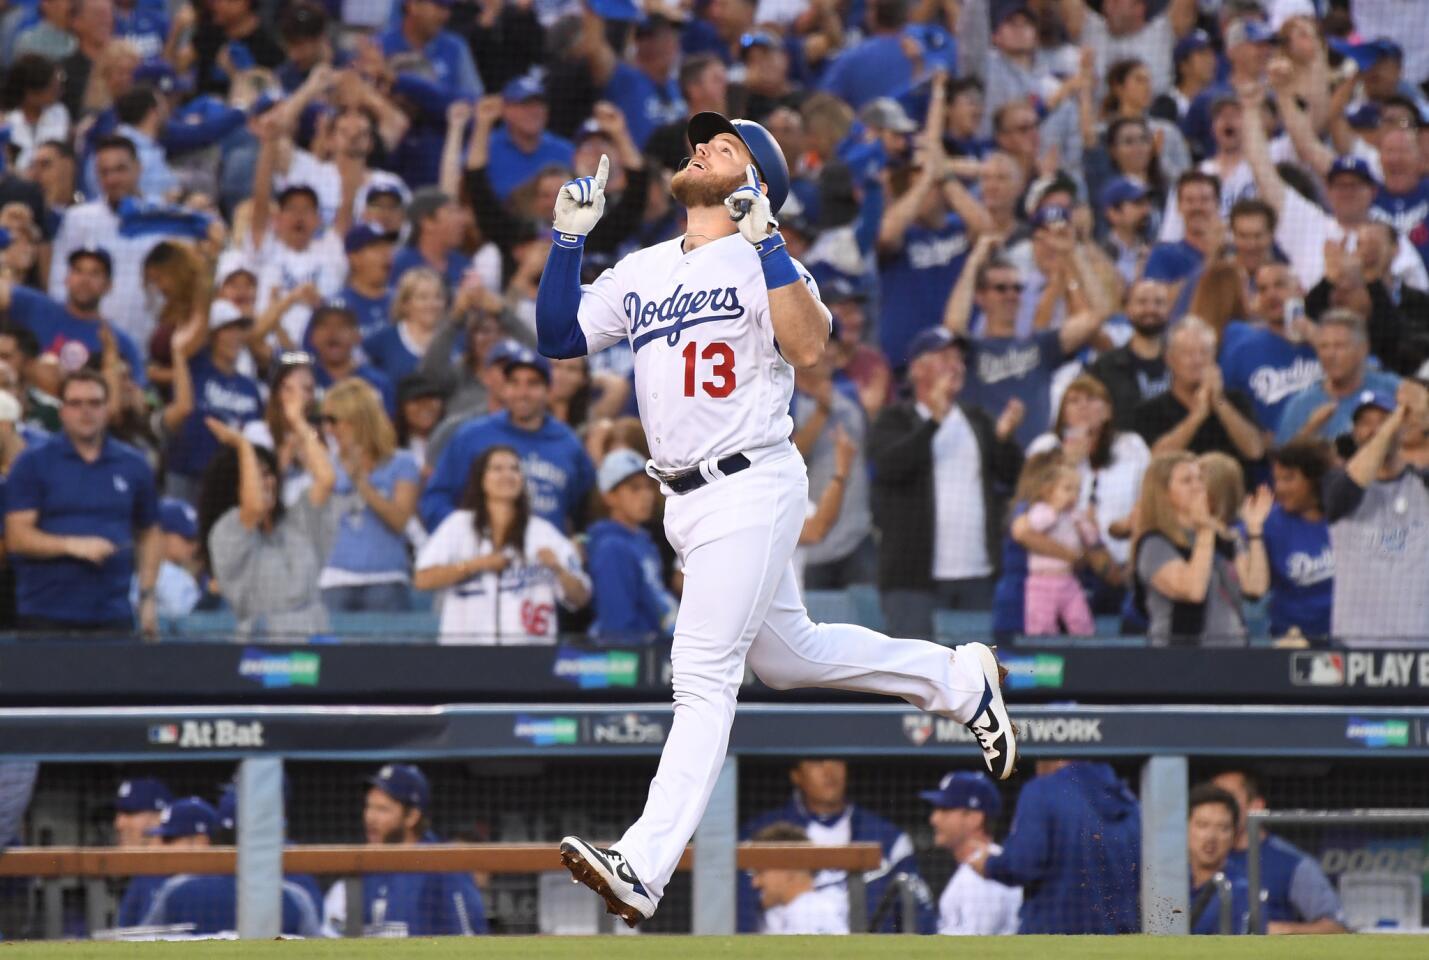 LOS ANGELES, OCTOBER 4, 2018-Dodgers Max Muncy celebrates his three-run home run against the Braves in the 2nd inning in Game 1 of the NLDS at Dodger Stadium Thursday. (Wally Skalij/Los Angeles Times)